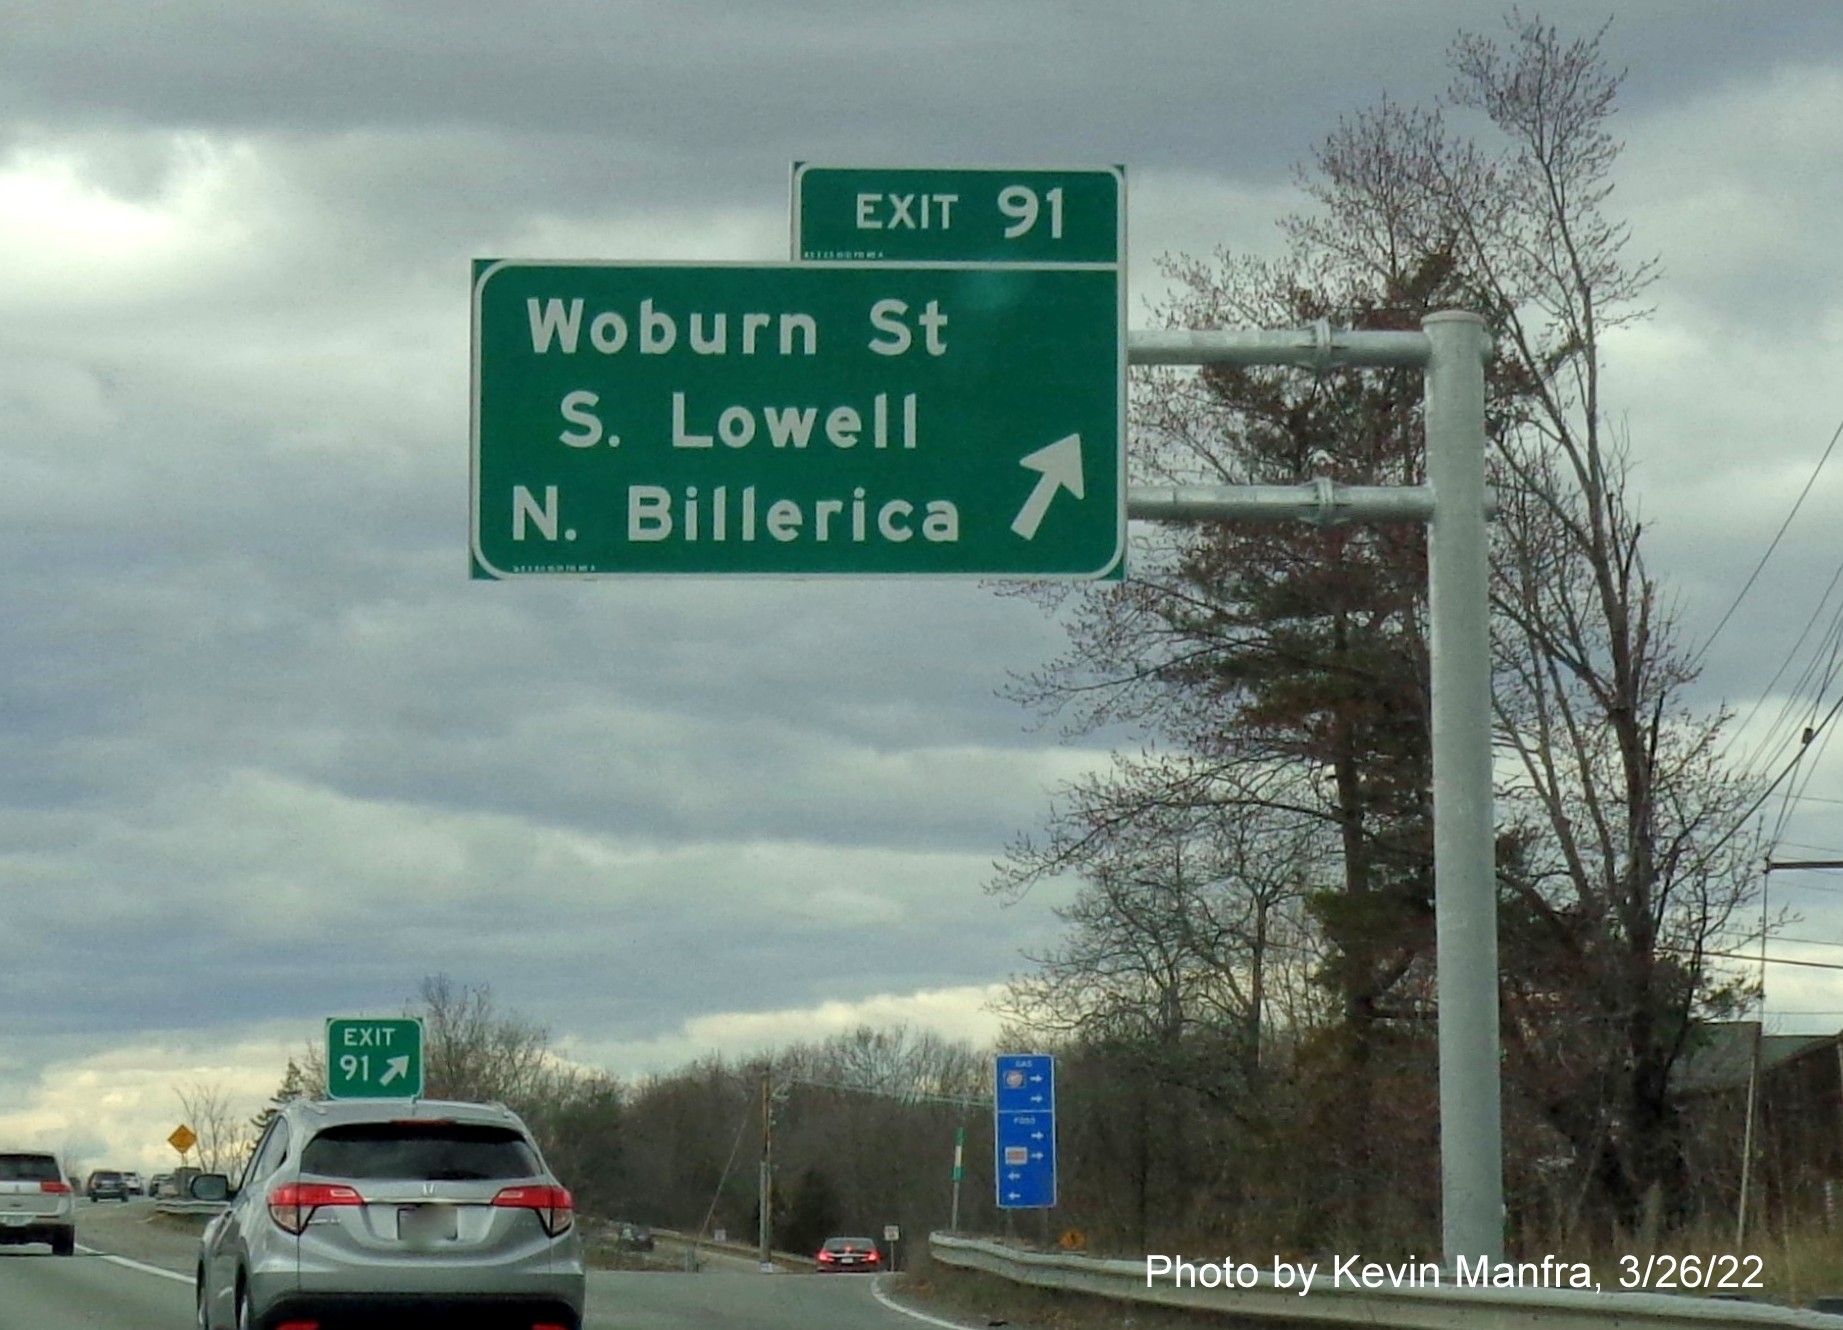 Image of recently placed overhead ramp sign for Woburn Street on I-495 South in Chelmsford, by Kevin Manfra, March 2022